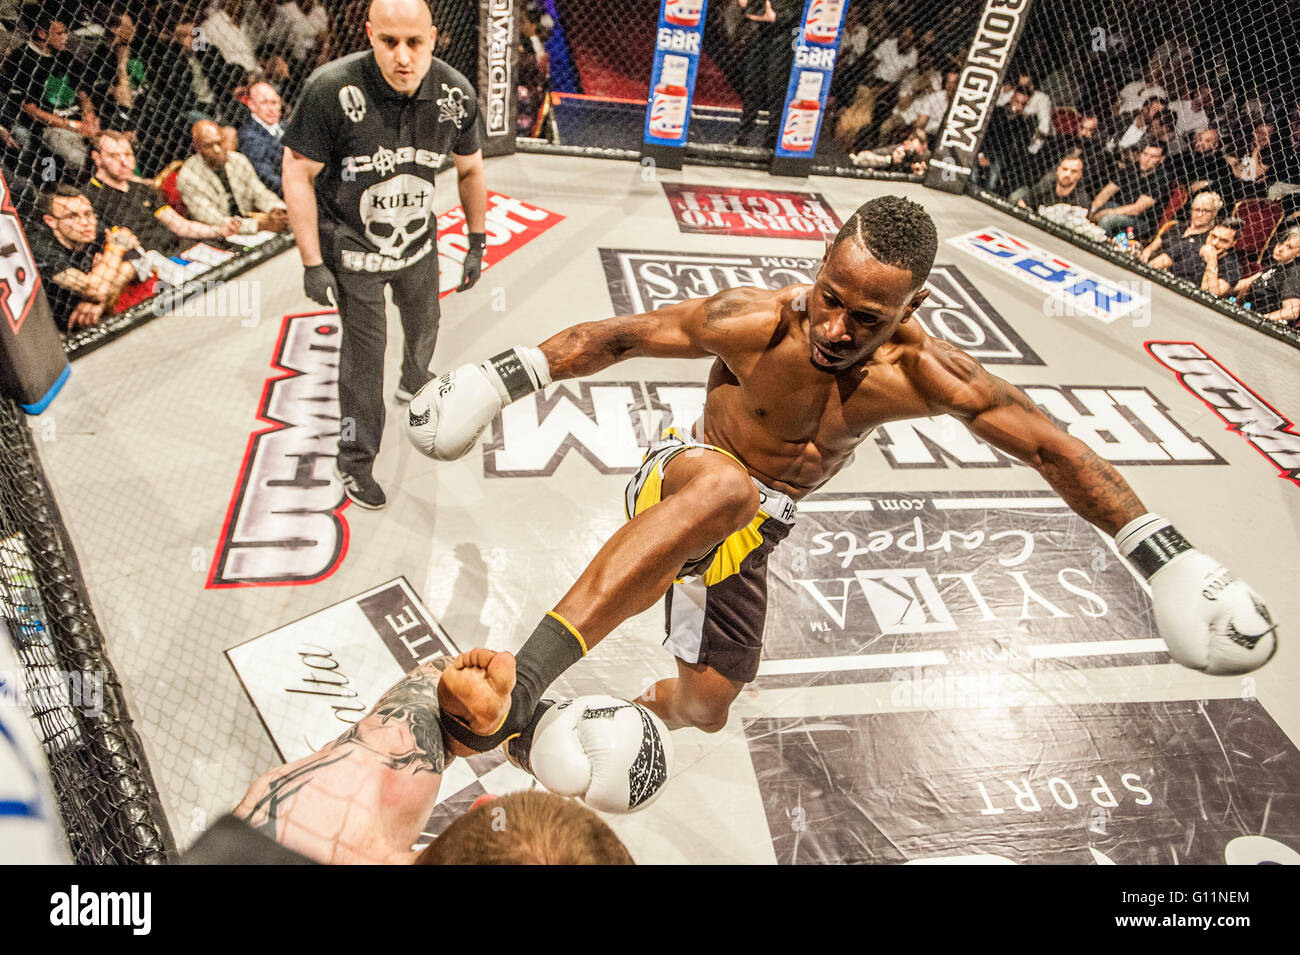 London, UK. 8th May 2016. UCMMA mixed martial arts cage fight competitors compete at the Troxy. Kris King vs Anthony Kannike in yellow shorts winner Credit:  roger parkes/Alamy Live News Stock Photo